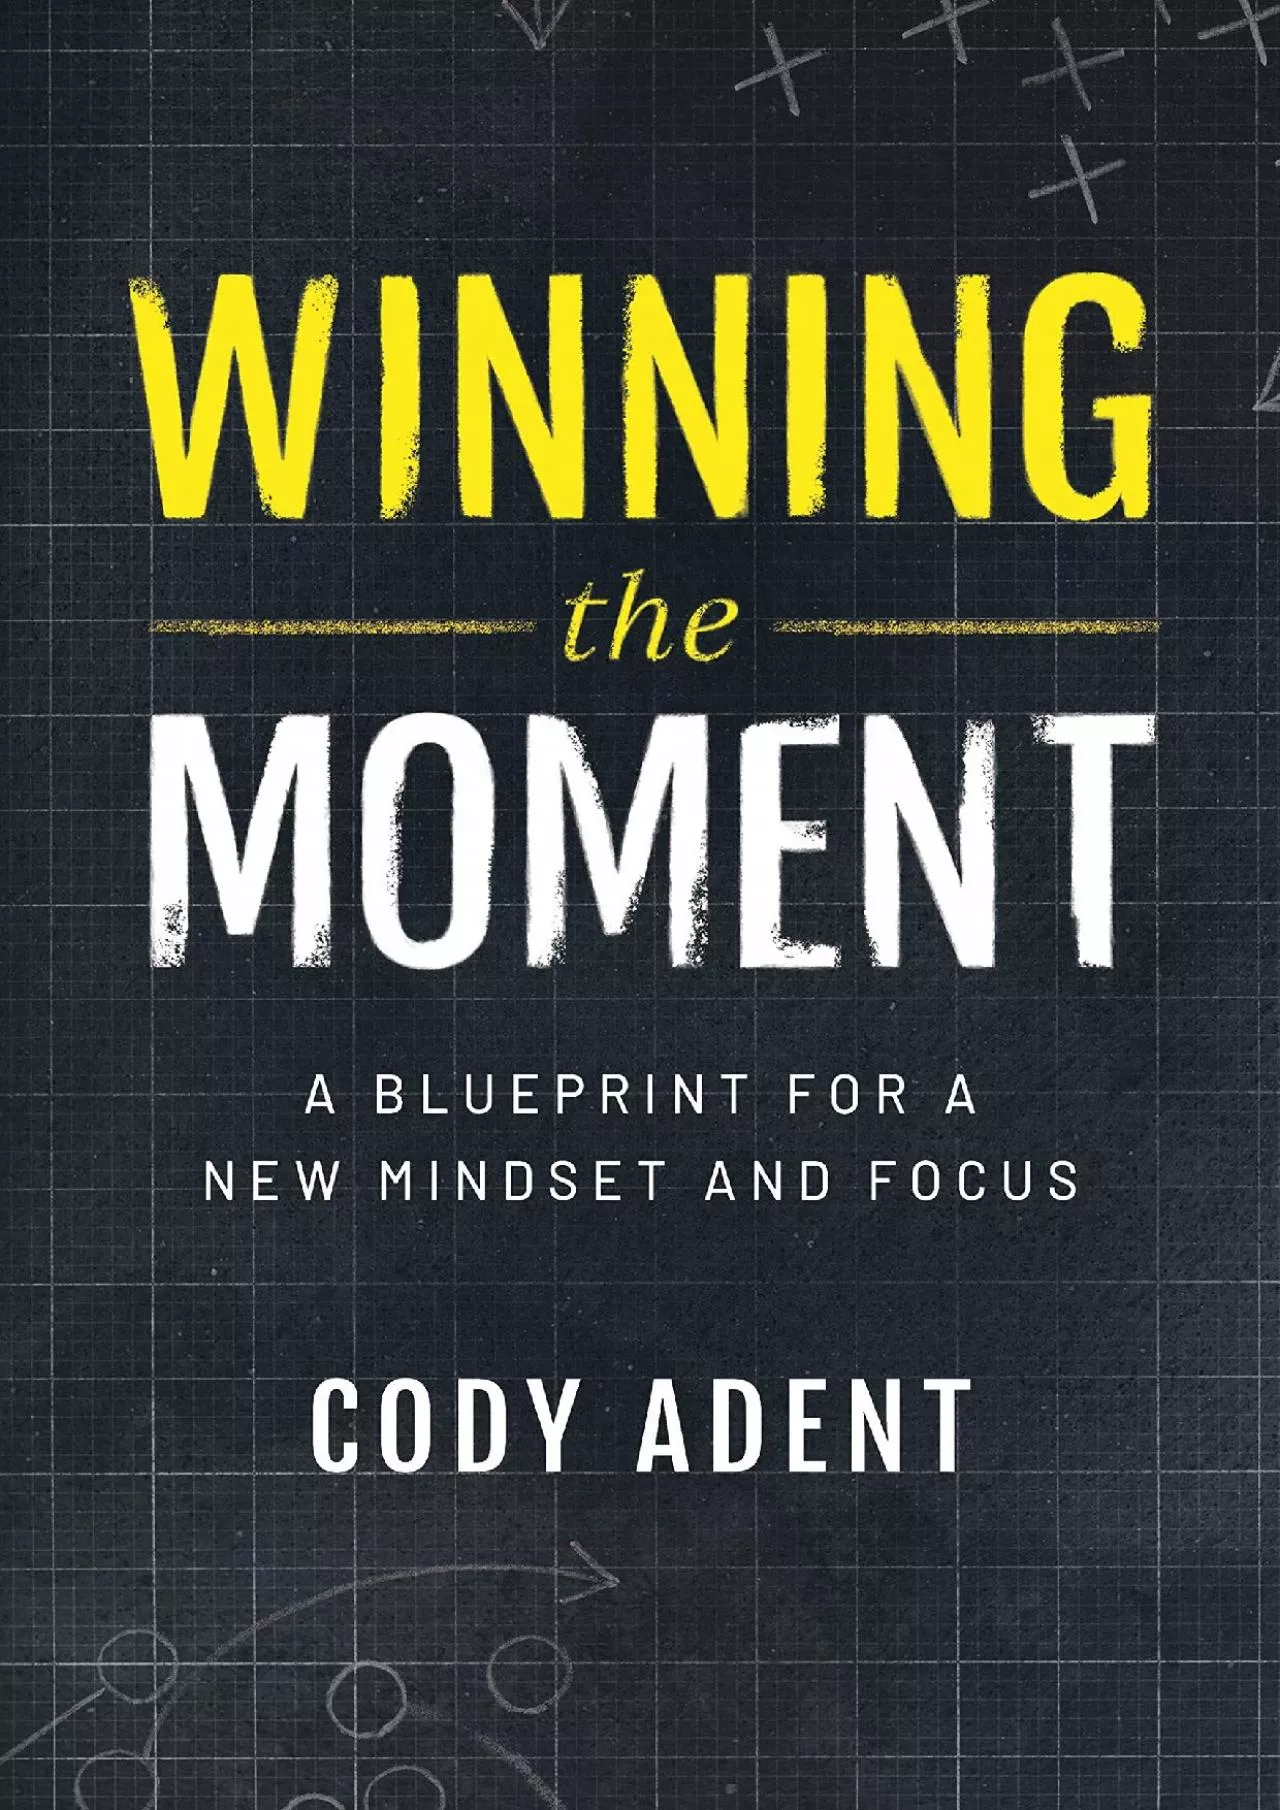 [EBOOK] Winning the Moment: A Blueprint for a New Mindset and Focus